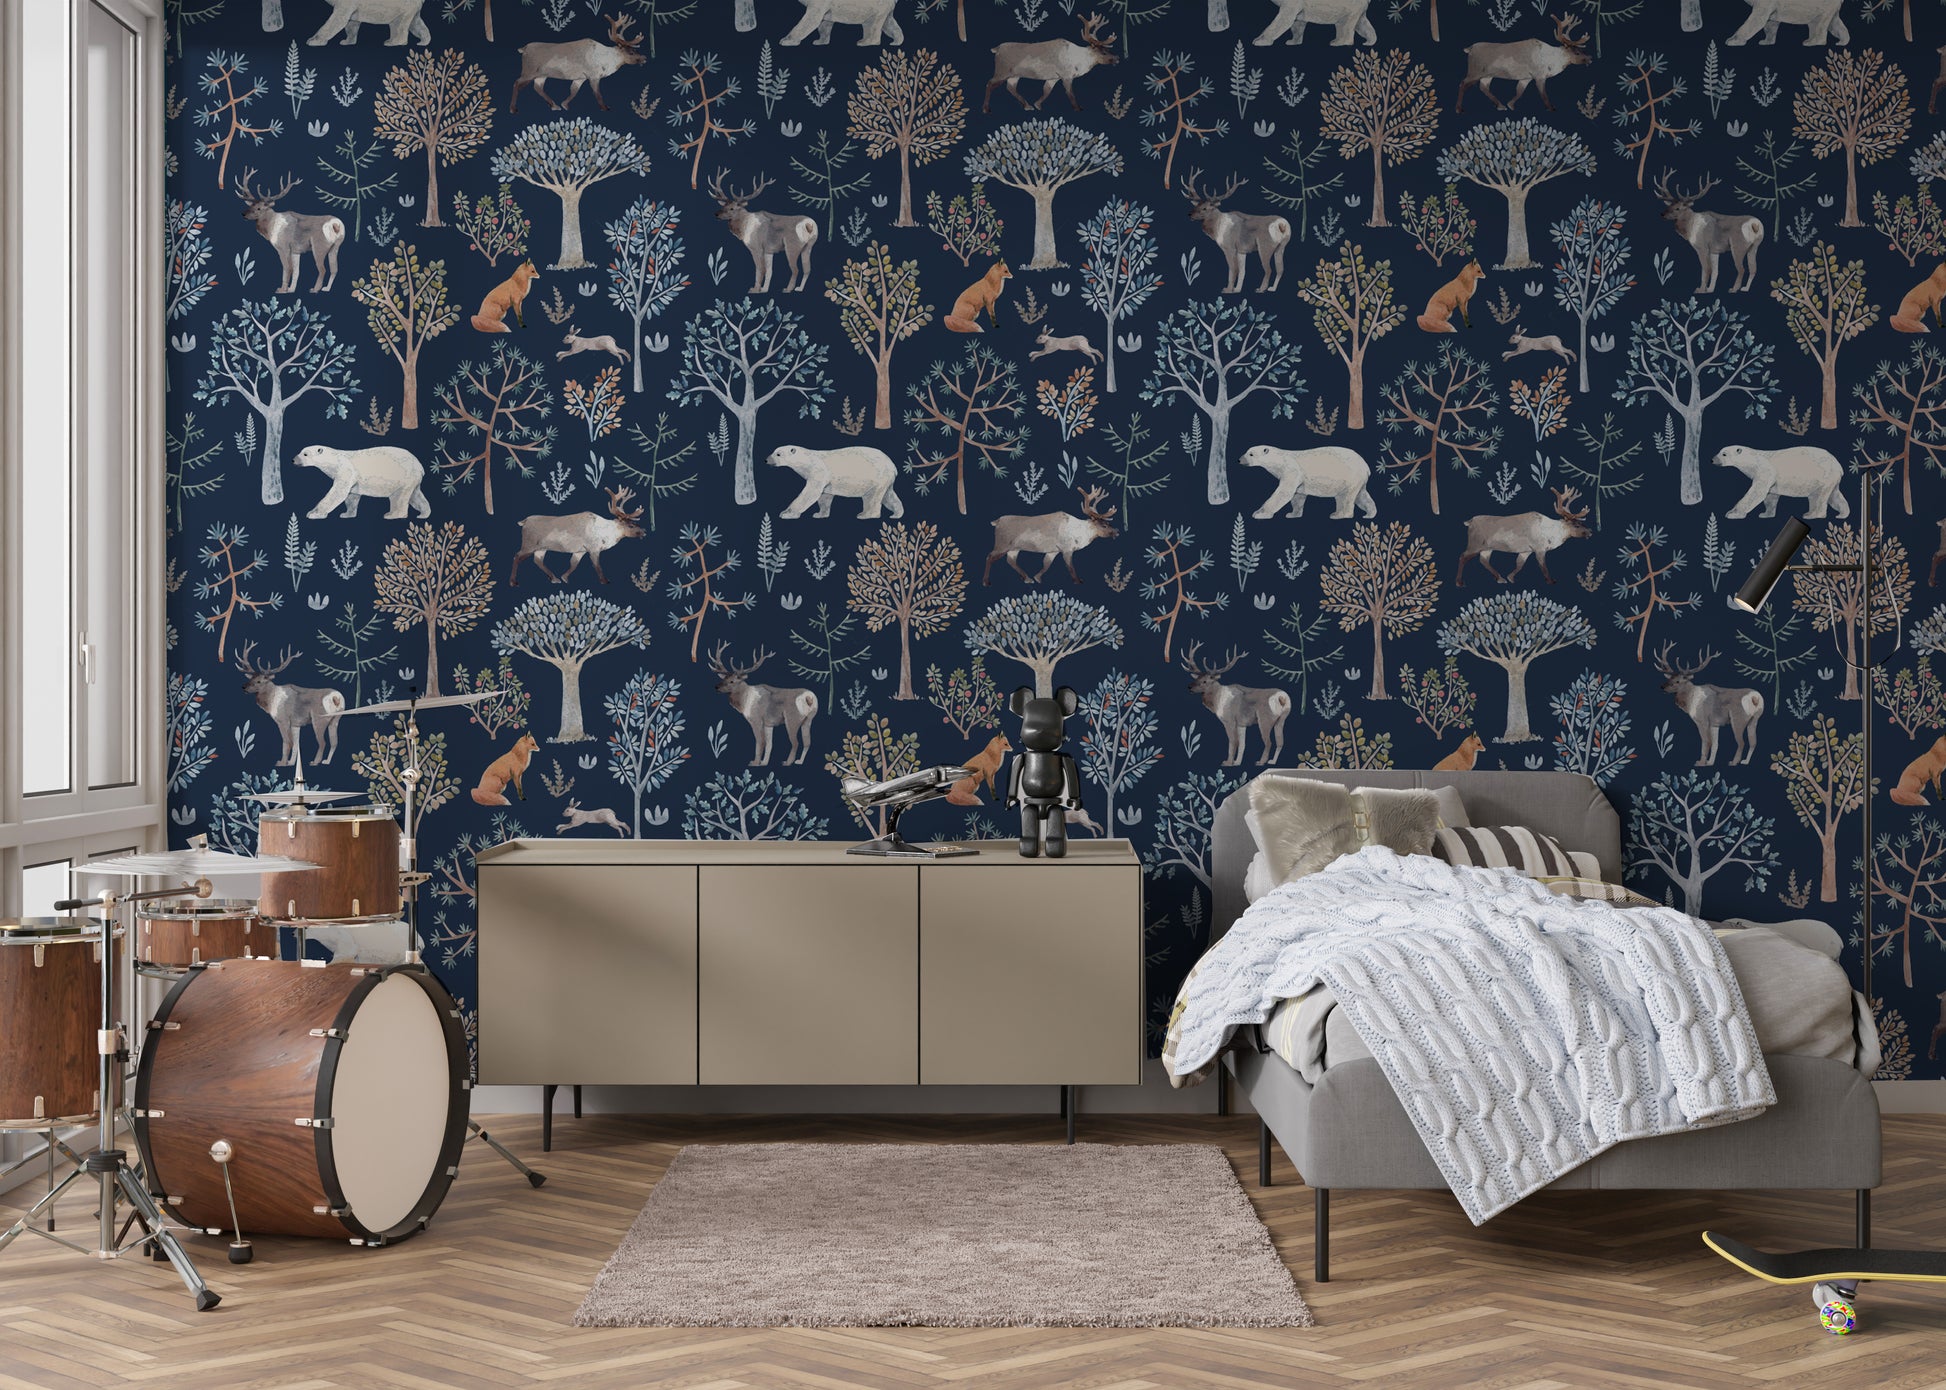 Woodland removable peel and stick wallpaper in boys bedroom